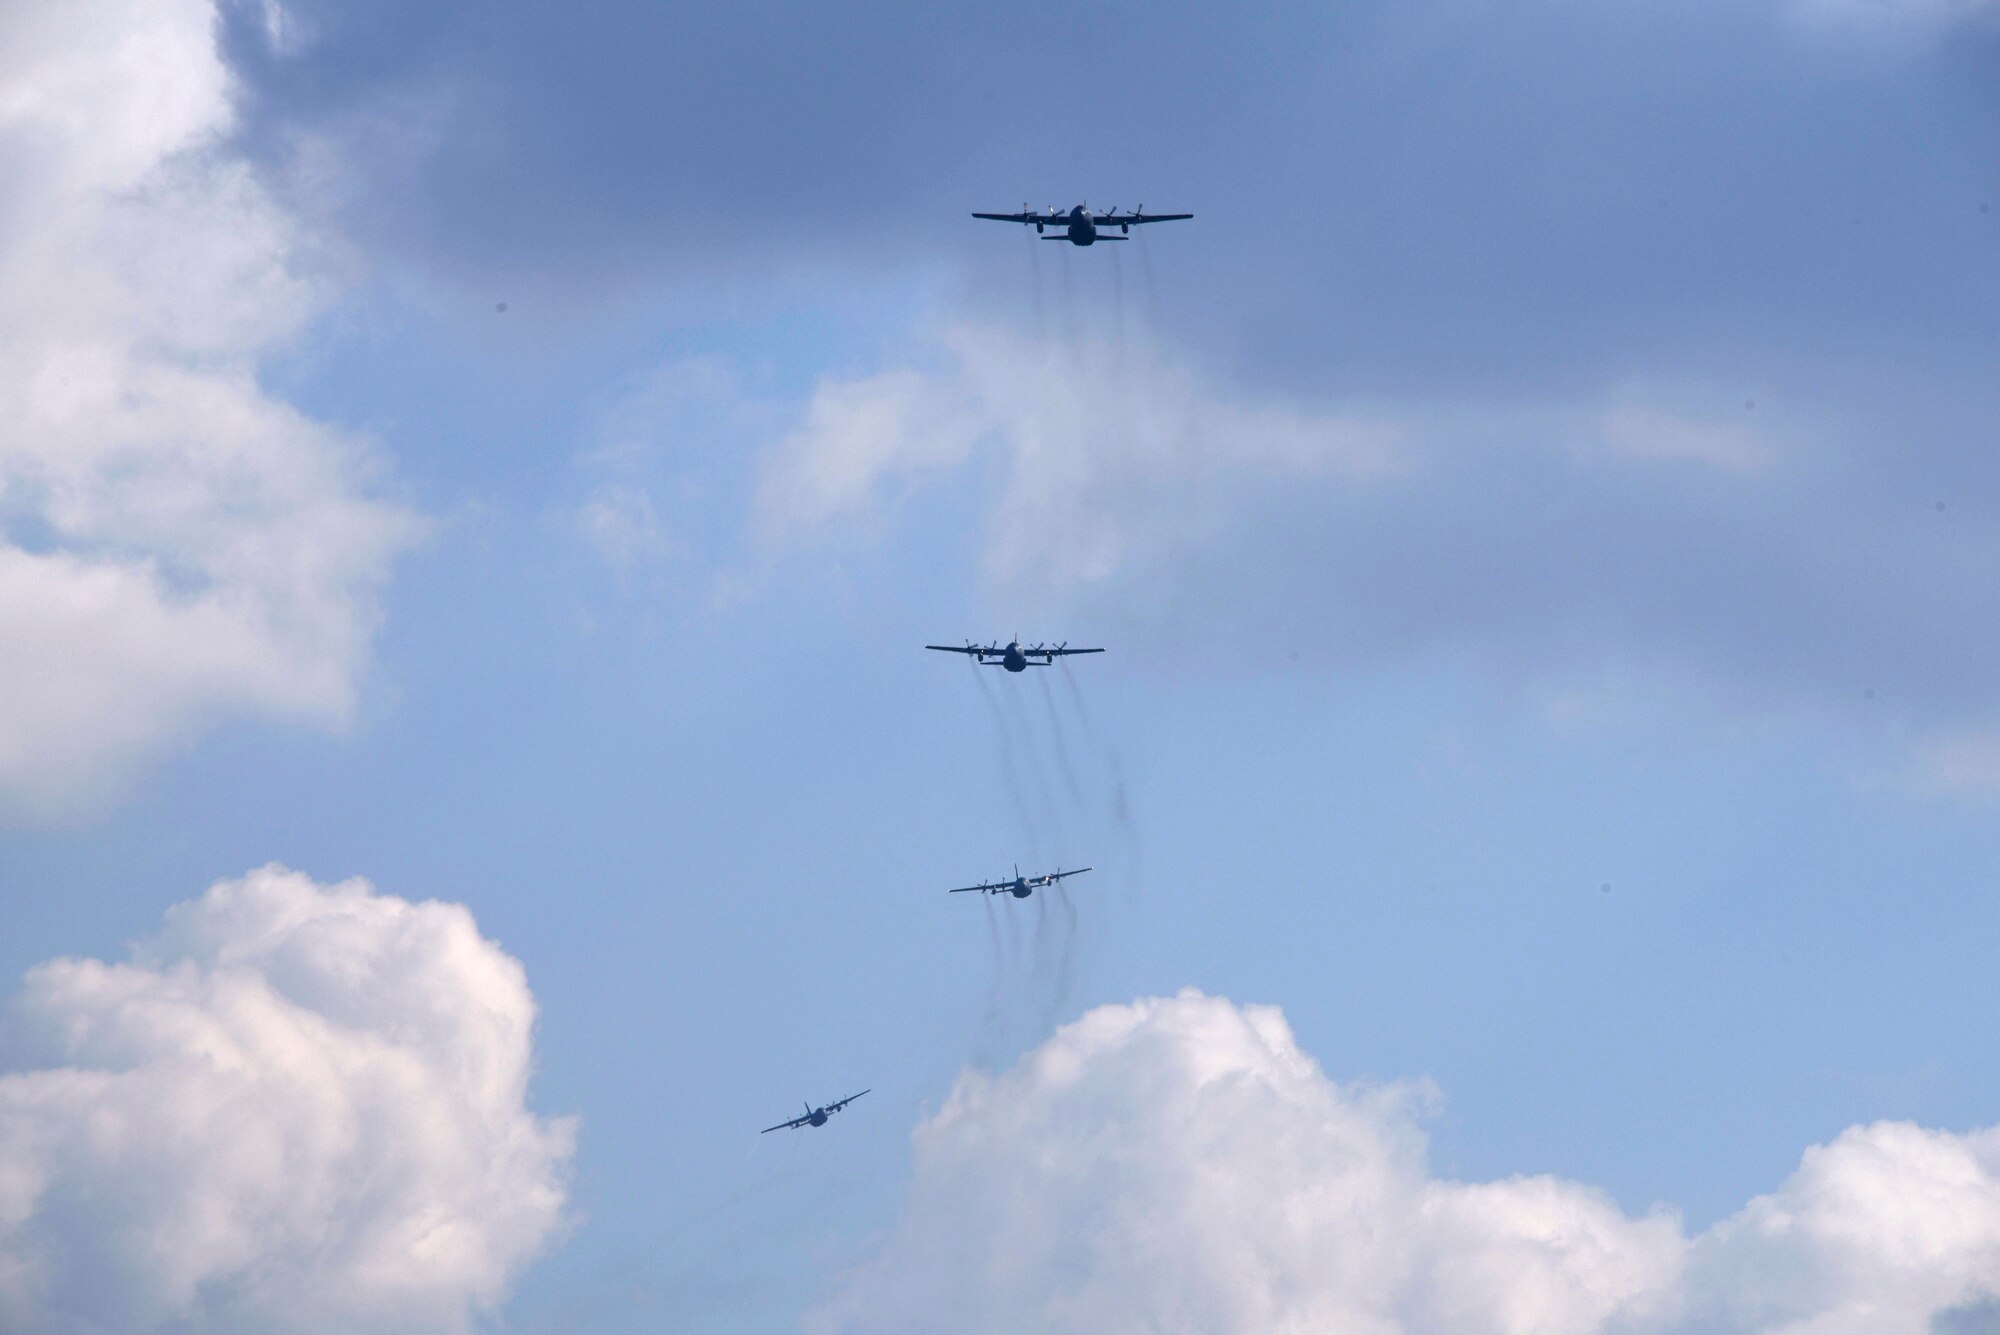 U.S. and Polish C-130 Hercules aircraft fly a 4-ship formation at Powidz Air Base, Poland, March 24, 2017.  Airmen from both countries participated in bilateral training during Aviation Detachment 17-2 in support of Operation Atlantic Resolve.  These bilateral trainings focused on maintaining joint readiness while building interoperability.  (Air National Guard photo by Staff Sgt. Alonzo Chapman/Released).